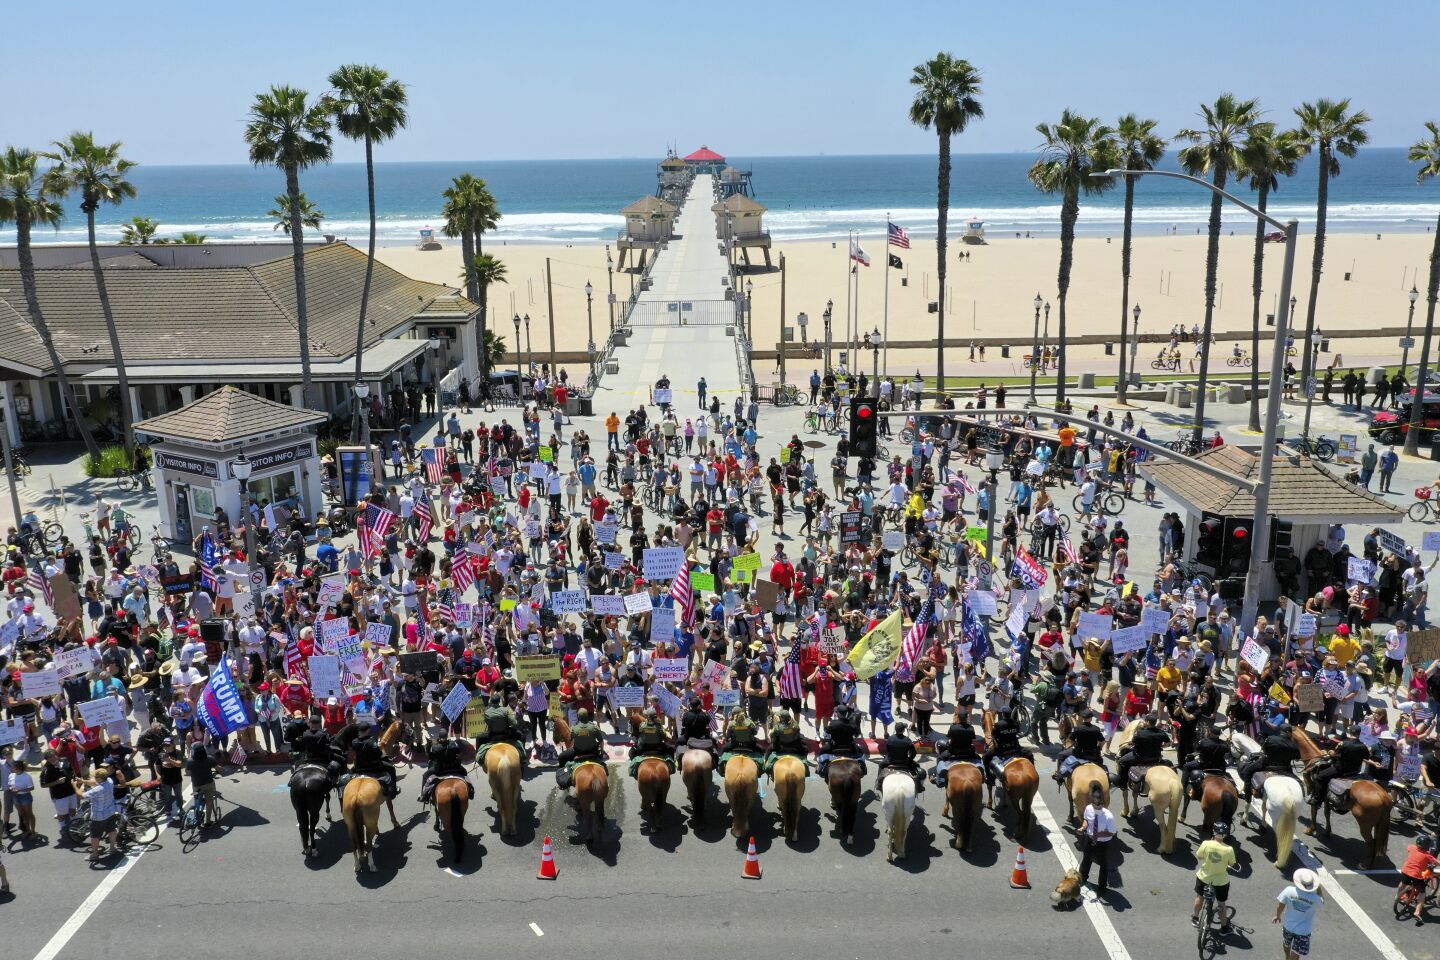 Protesters in Huntington Beach